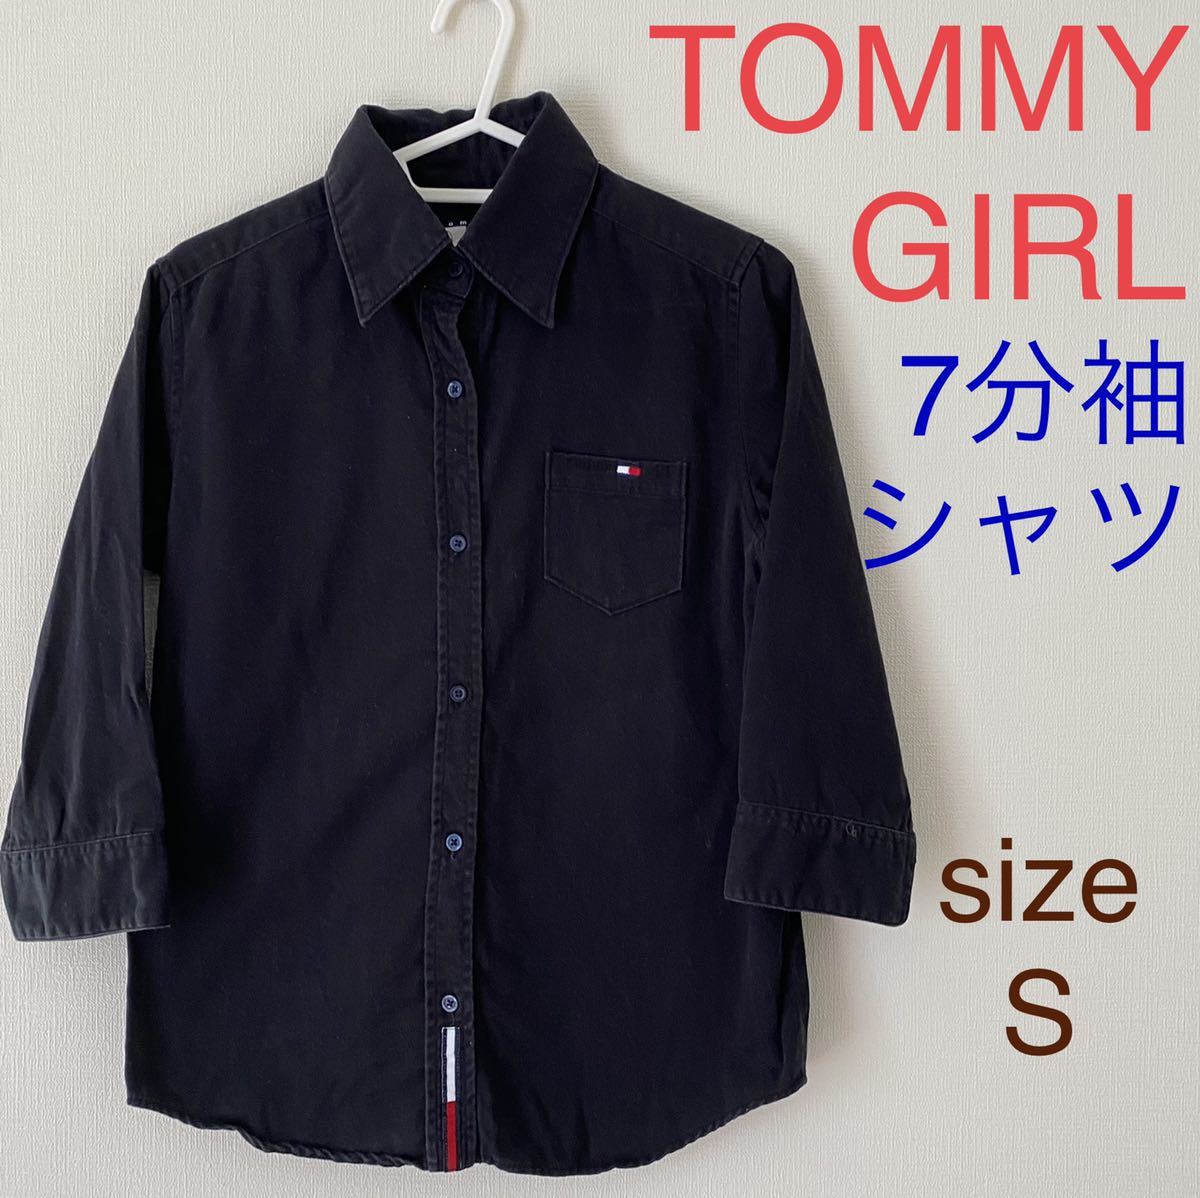  Tommy girl TOMMY GIRL oxford 7 minute sleeve shirt HILFIGER S